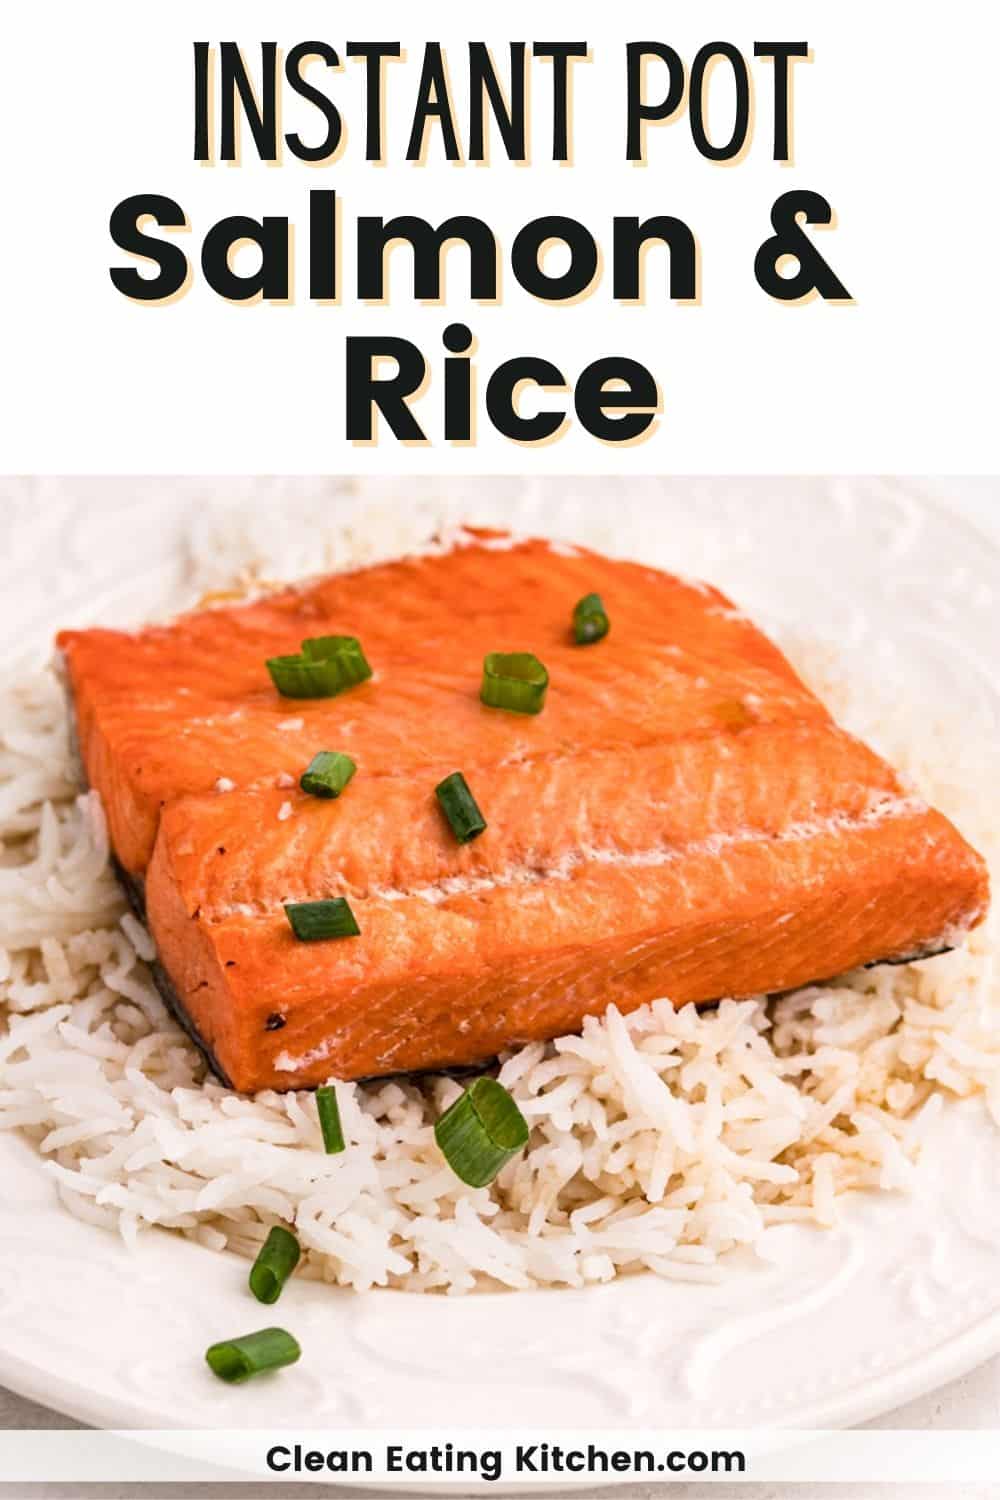 Instant Pot Salmon and Rice - Clean Eating Kitchen